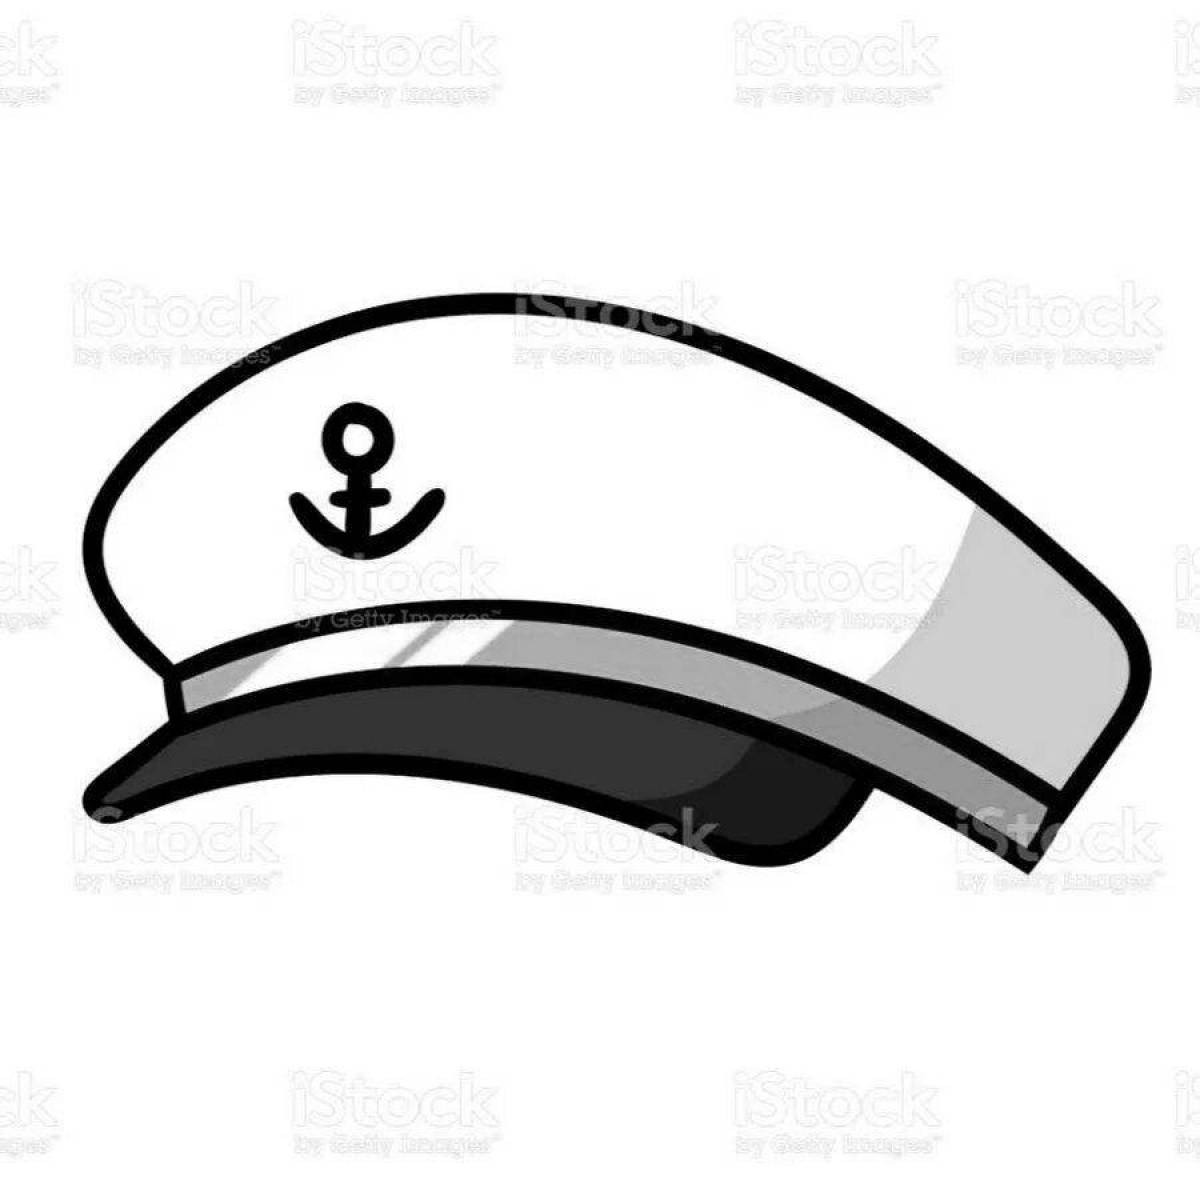 Adorable nautical hat coloring book for kids